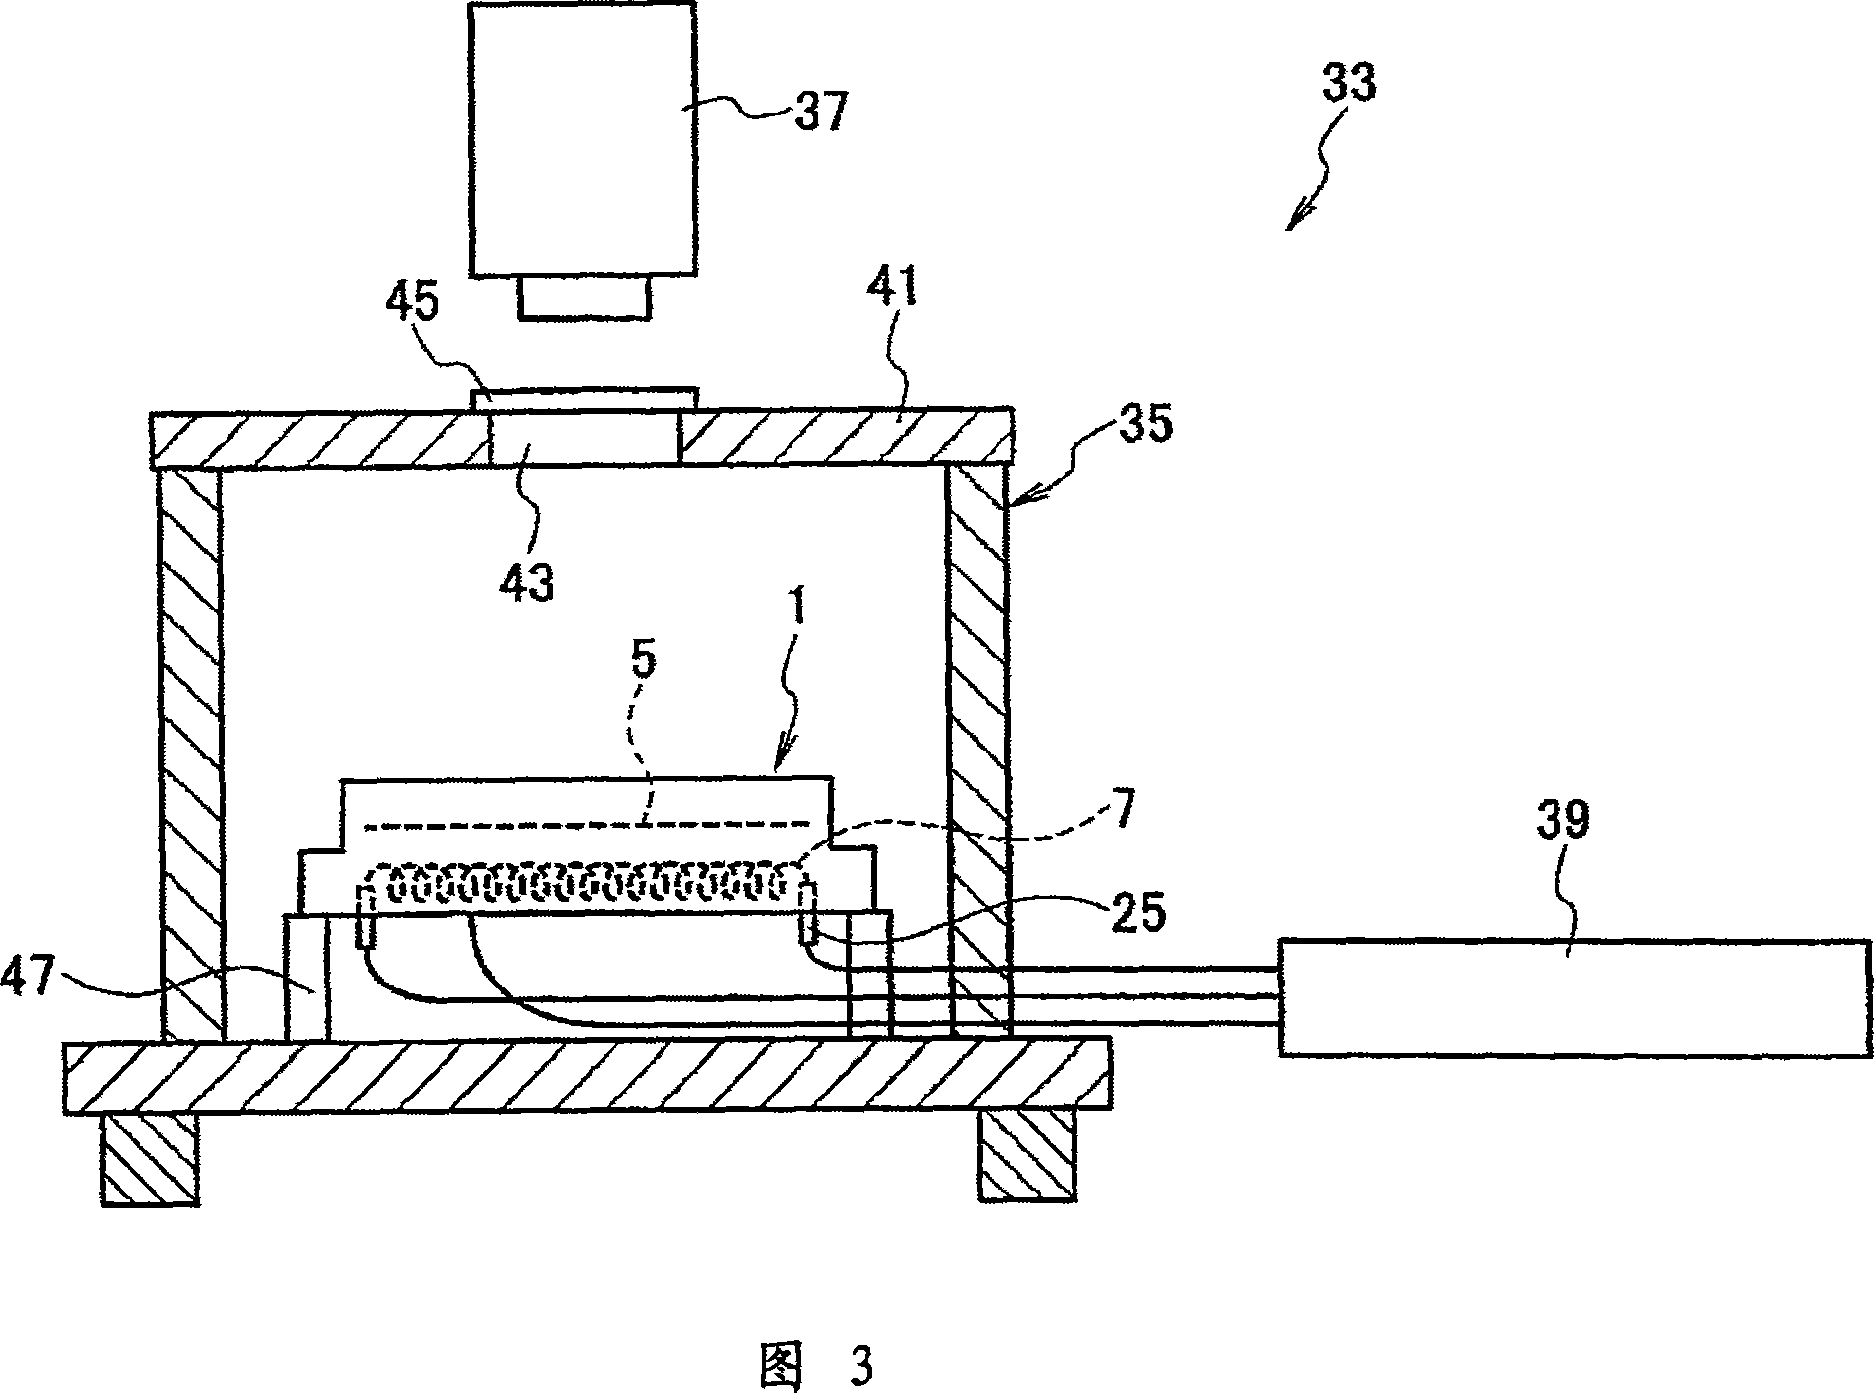 Electrostatic chuck with heater